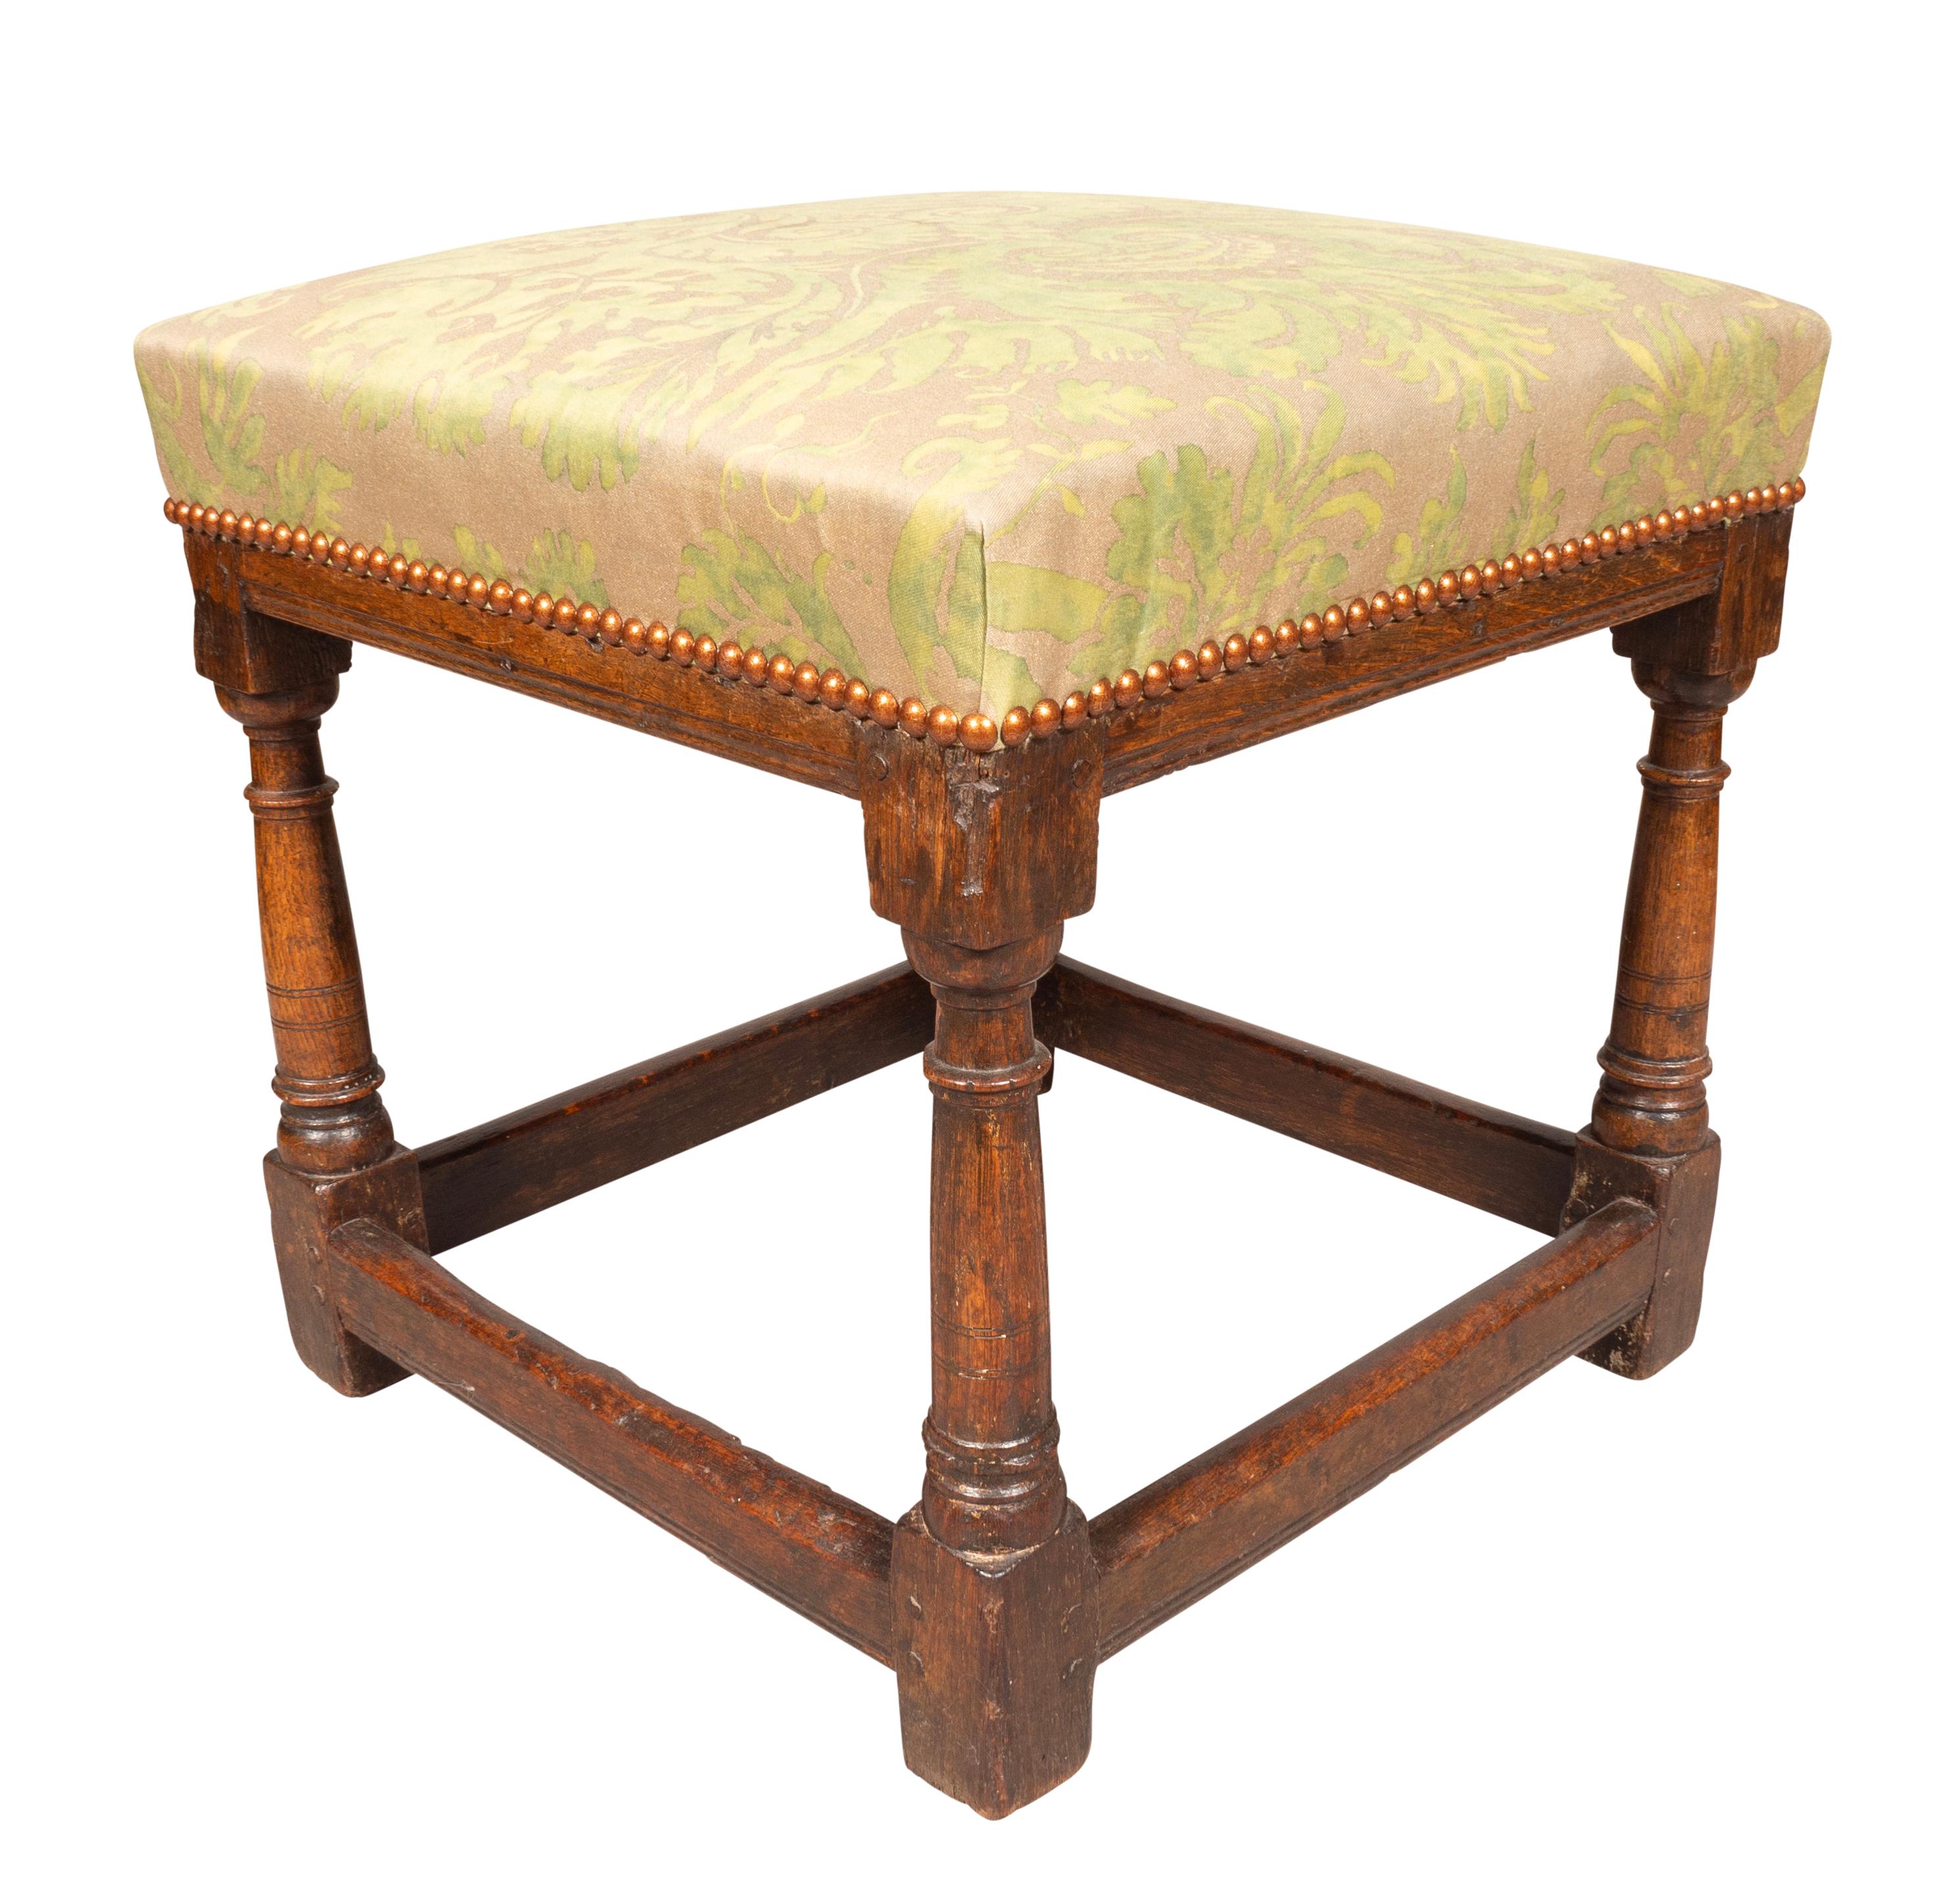 Square with Fortuny upholstered seat. Turned legs with box stretcher.